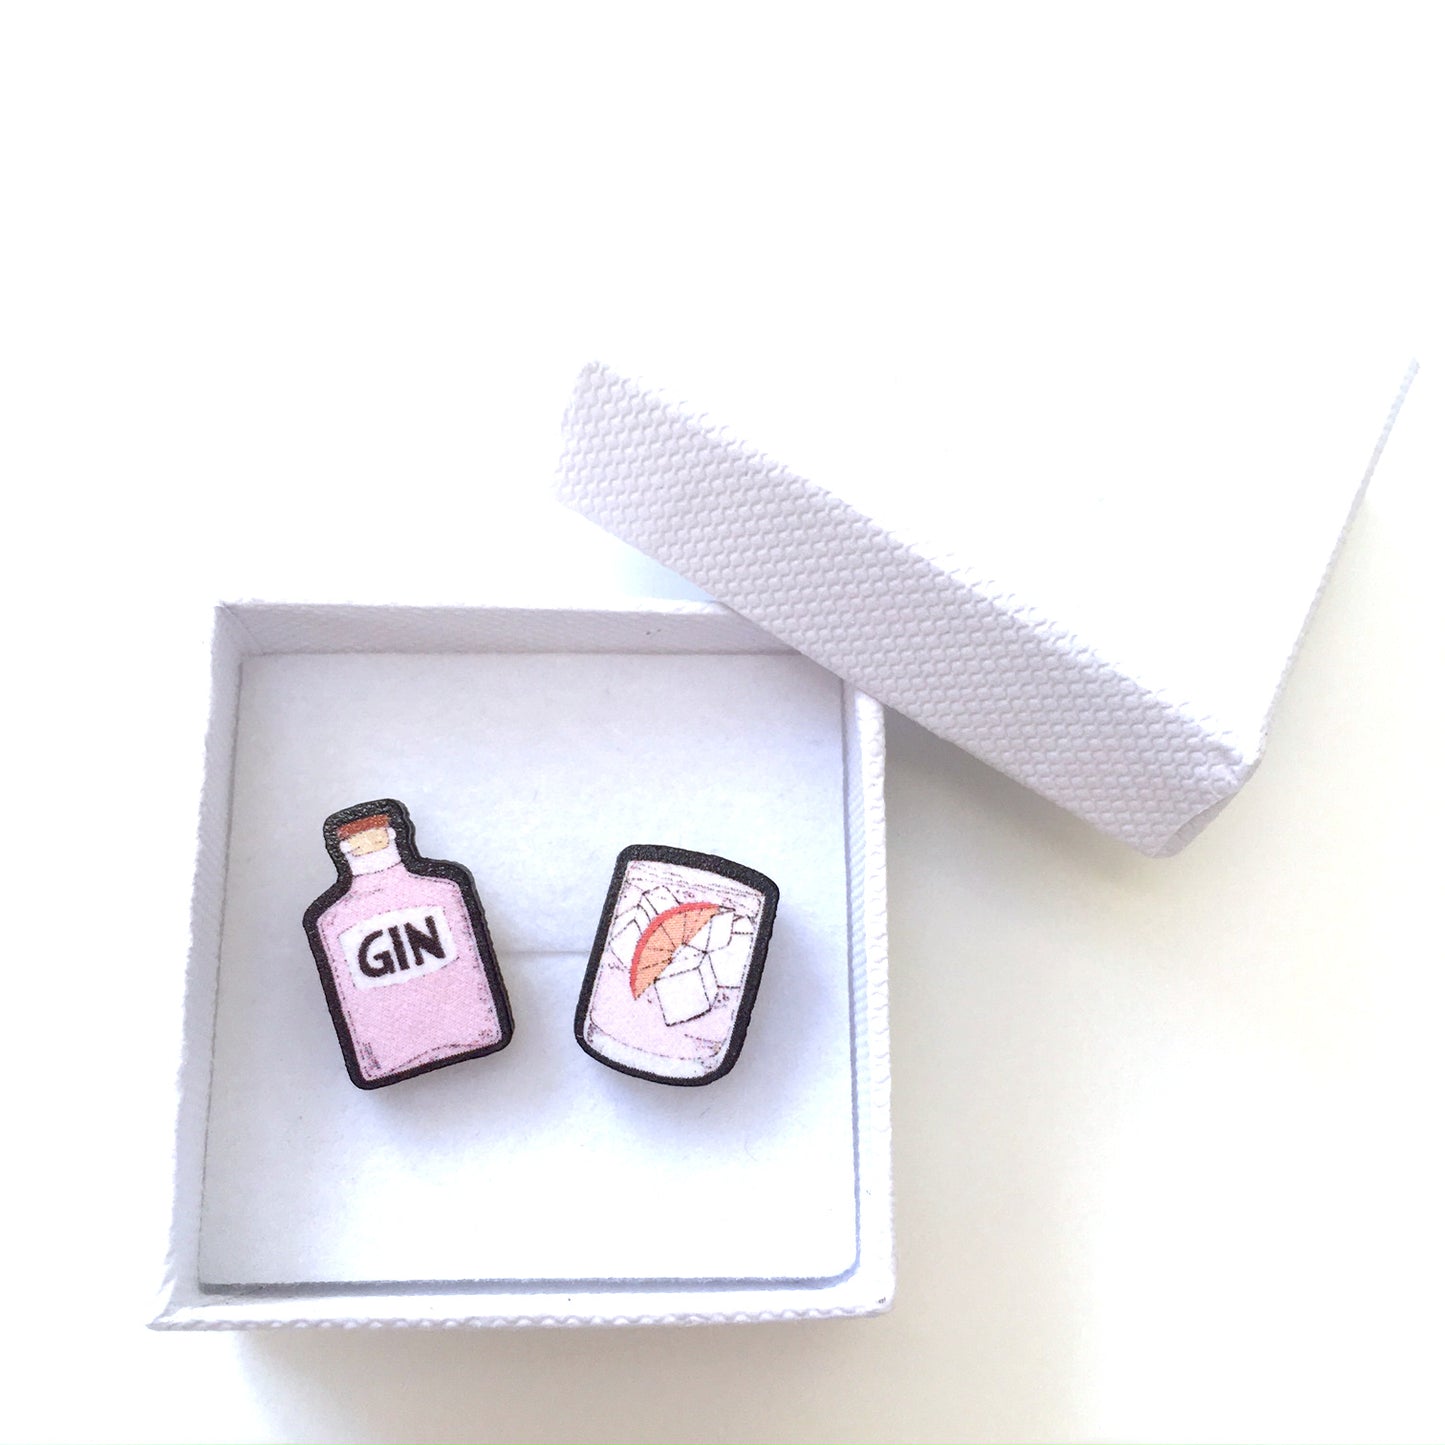 Pink gin and tonic mismatch stud earrings